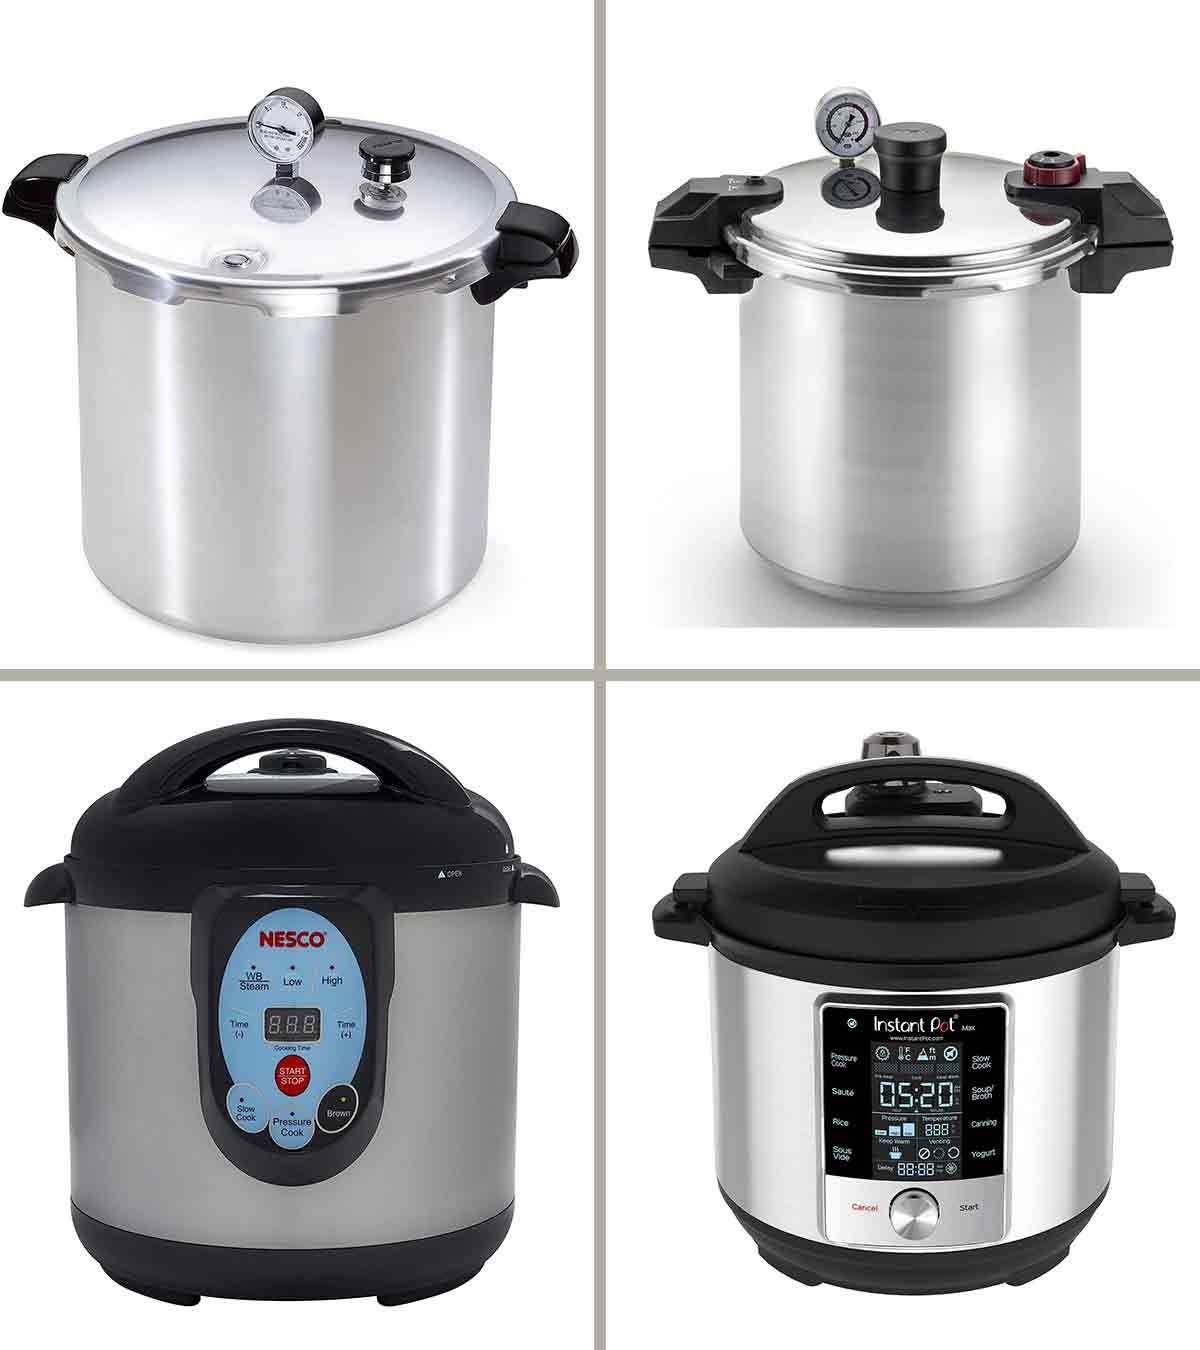 YWSJGH Pressure cooker 15L,22L pressure tank with pressure gauge high-capacity aluminum fast cooking stove presto pressure canner slow cooker rice cooker Color : Silver, Size : 15L 